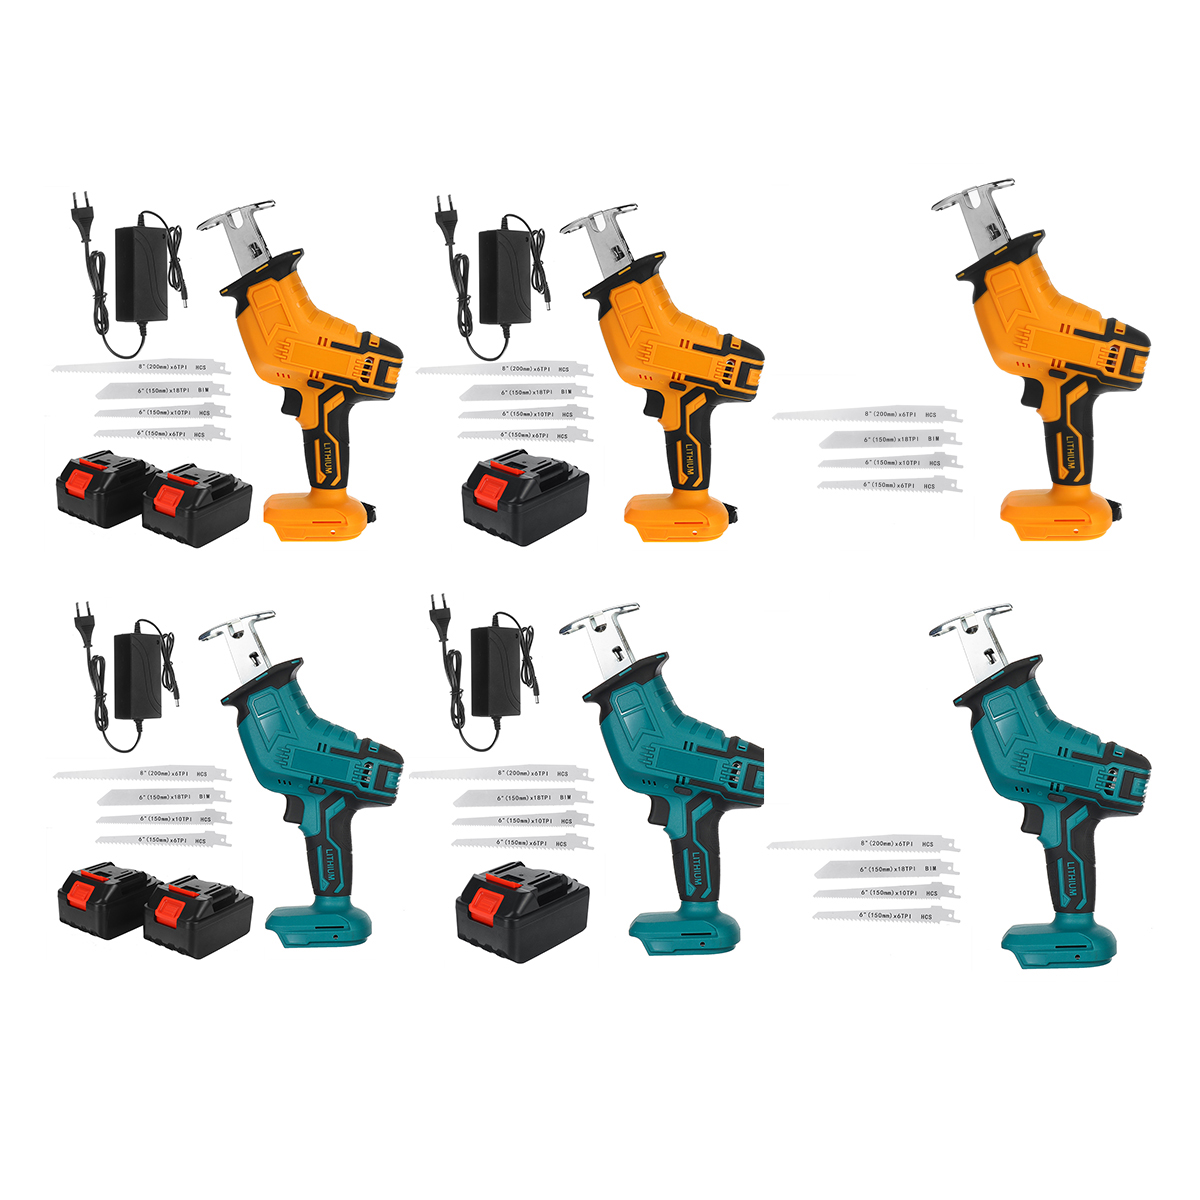 Rechargeable-Cordless-Reciprocating-Saw-Handheld-Woodorking-Wood-Cutter-W-None12-Battery--4PCS-Saw-B-1879912-9